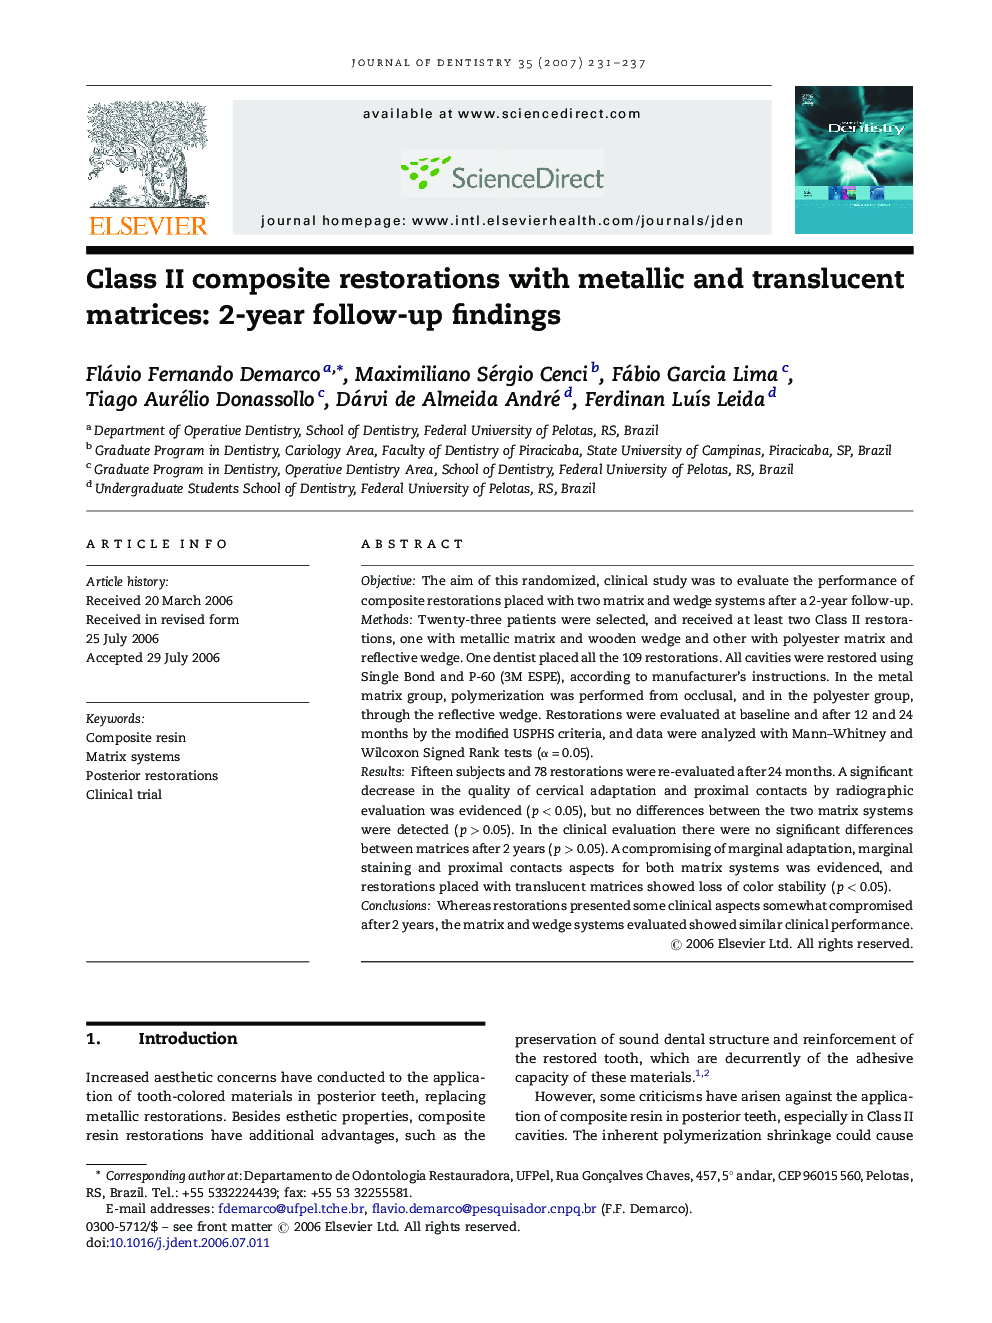 Class II composite restorations with metallic and translucent matrices: 2-year follow-up findings